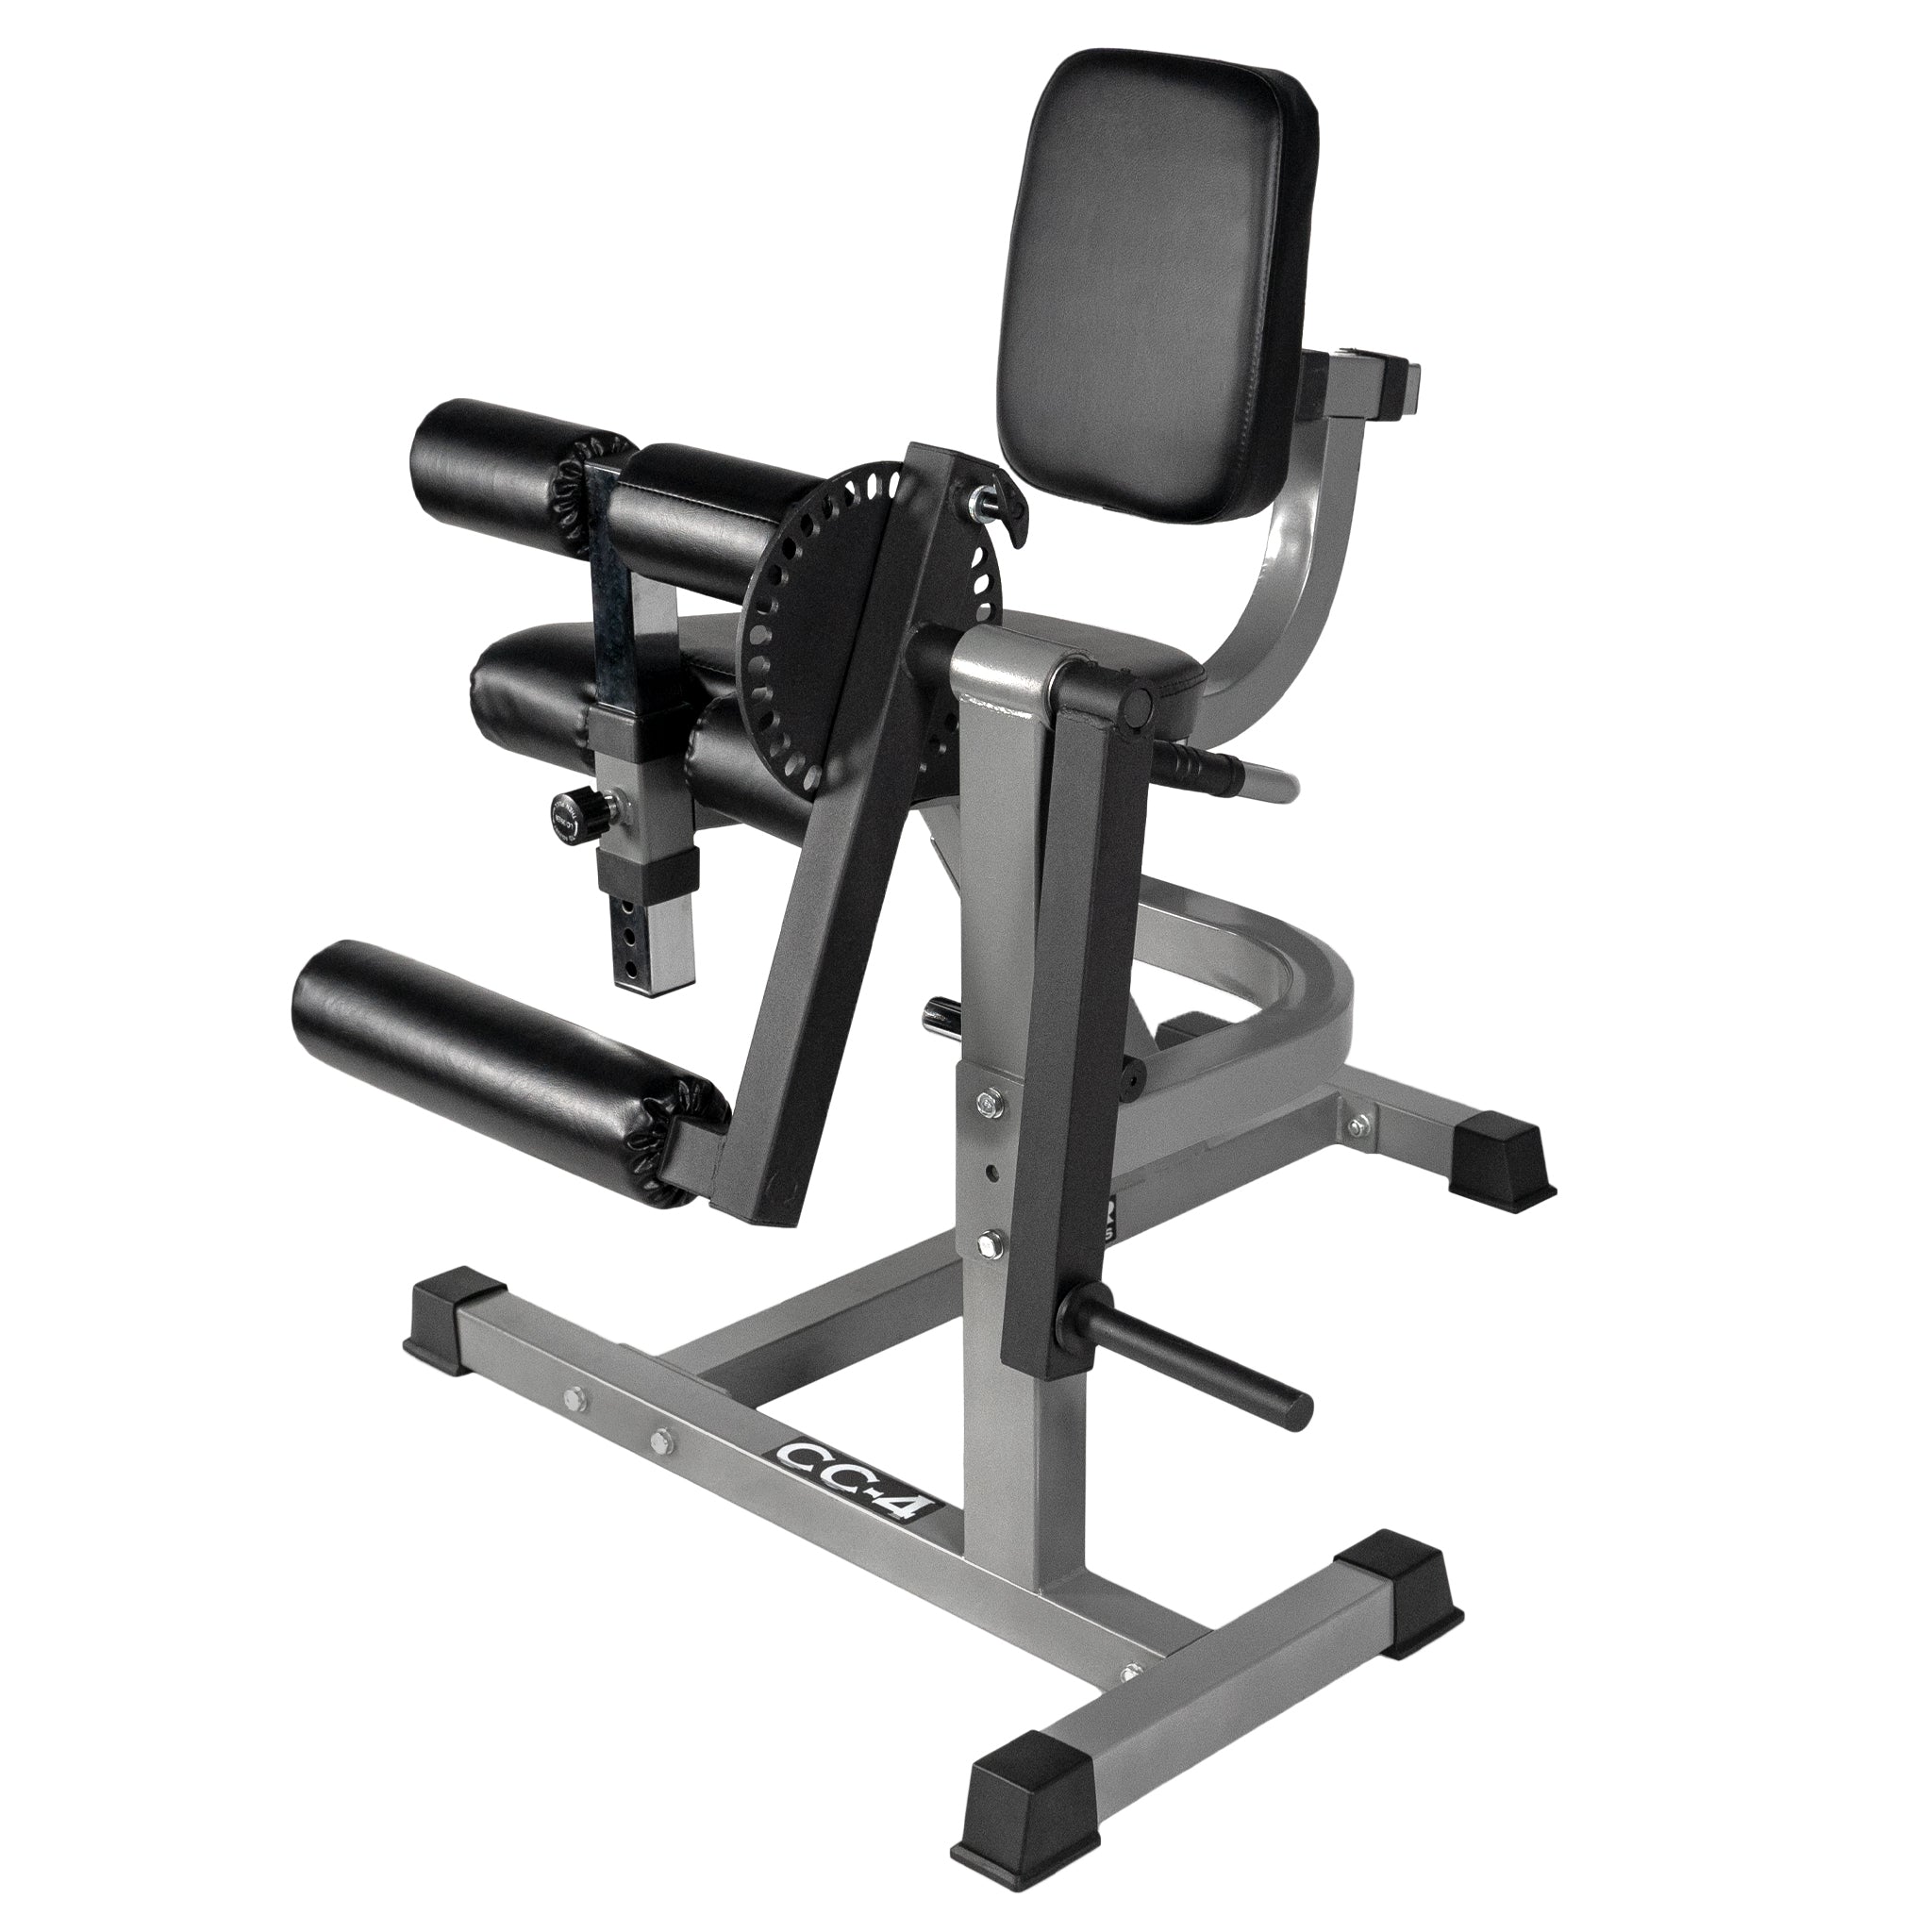 How to Use Leg Press, Curl, and Lift Machines